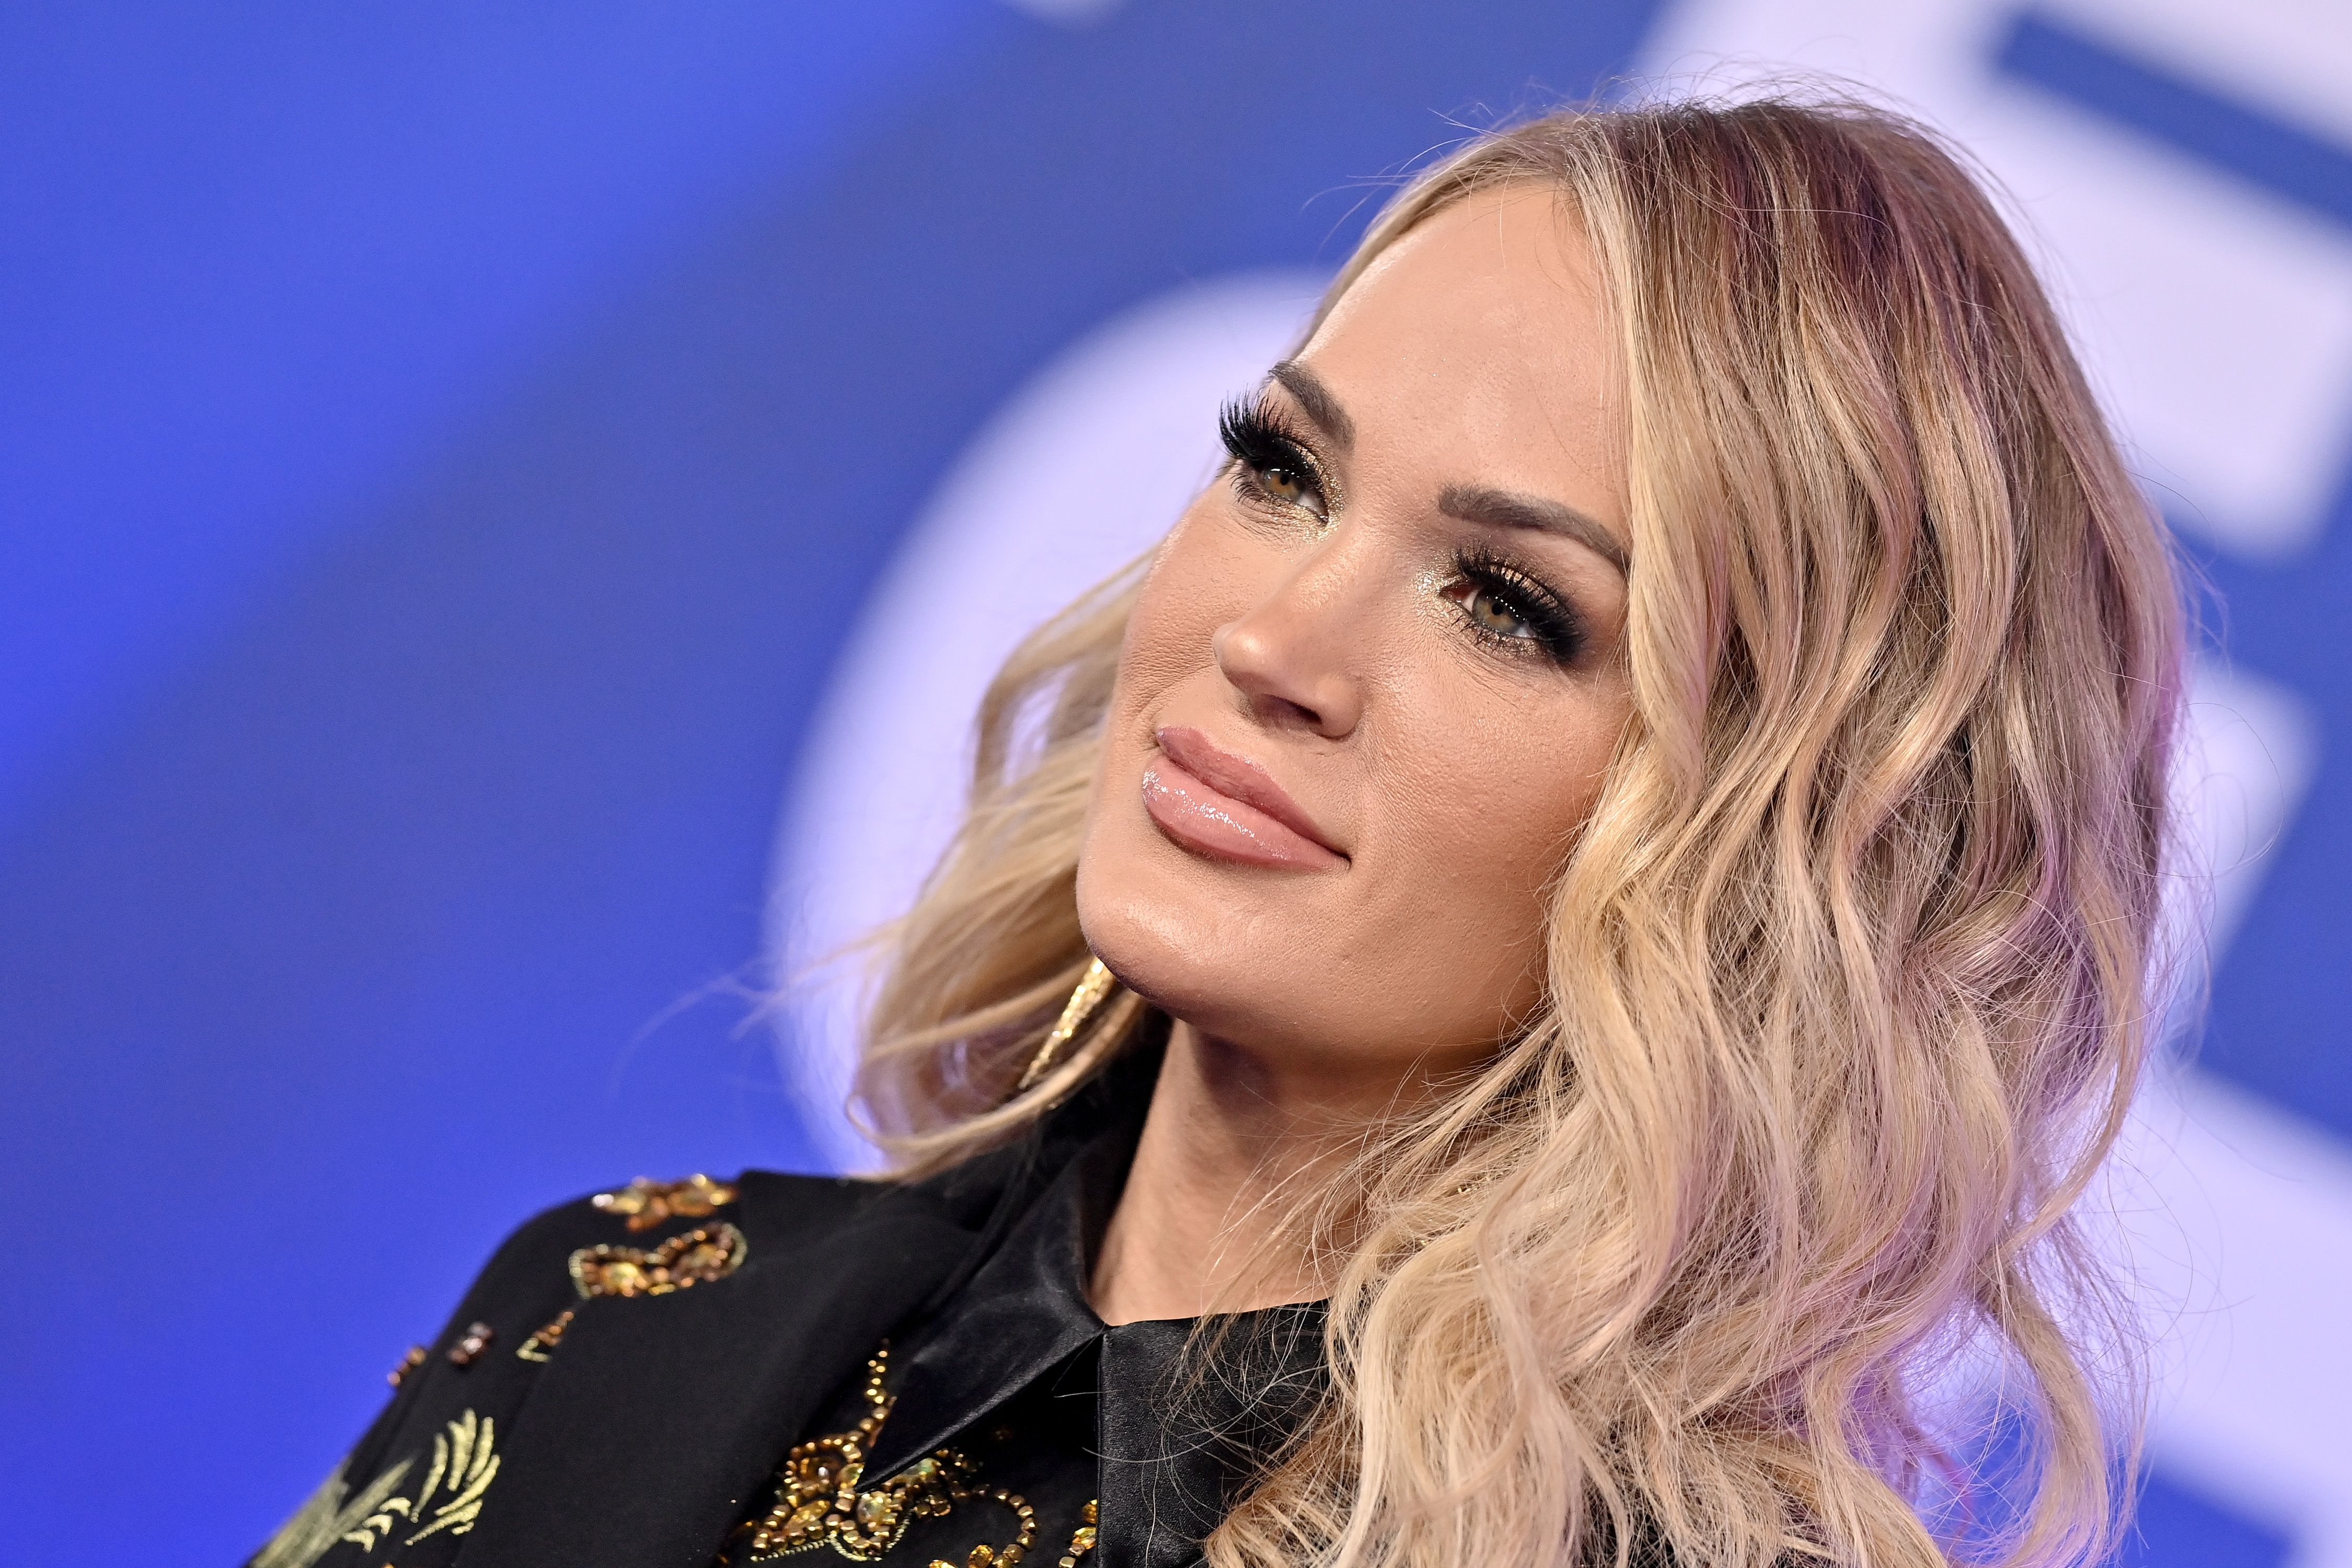 Carrie Underwood's Latest Grand Ole Opry Dress Has Everyone Talking